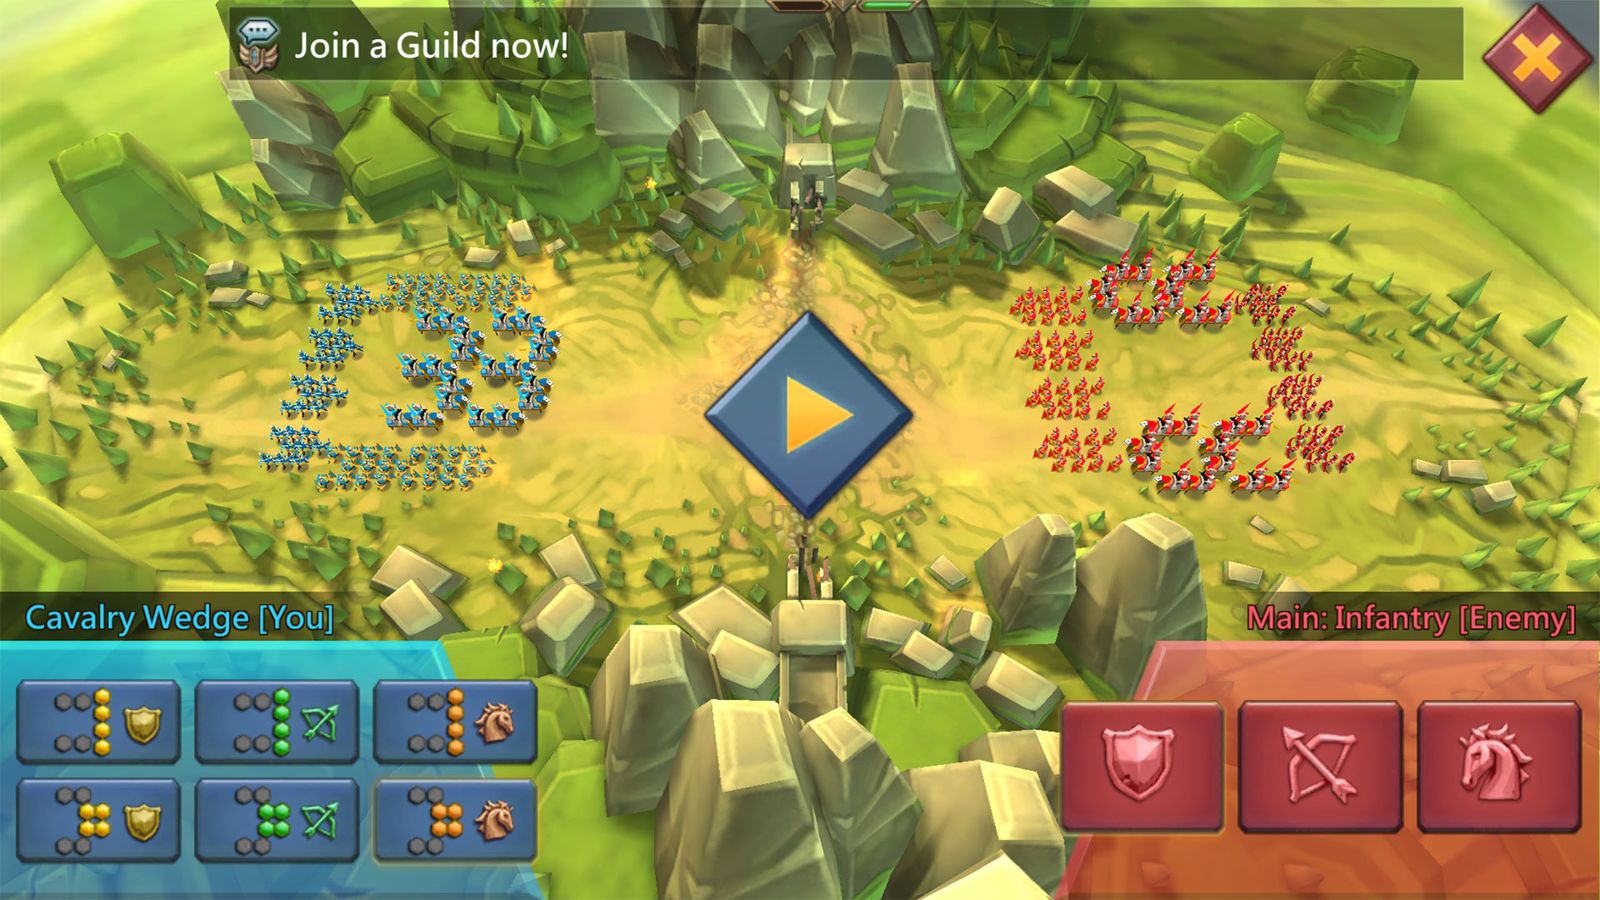 Screenshot of a battle sequence in Lords Mobile, with a green field and soldiers fighting on both sides